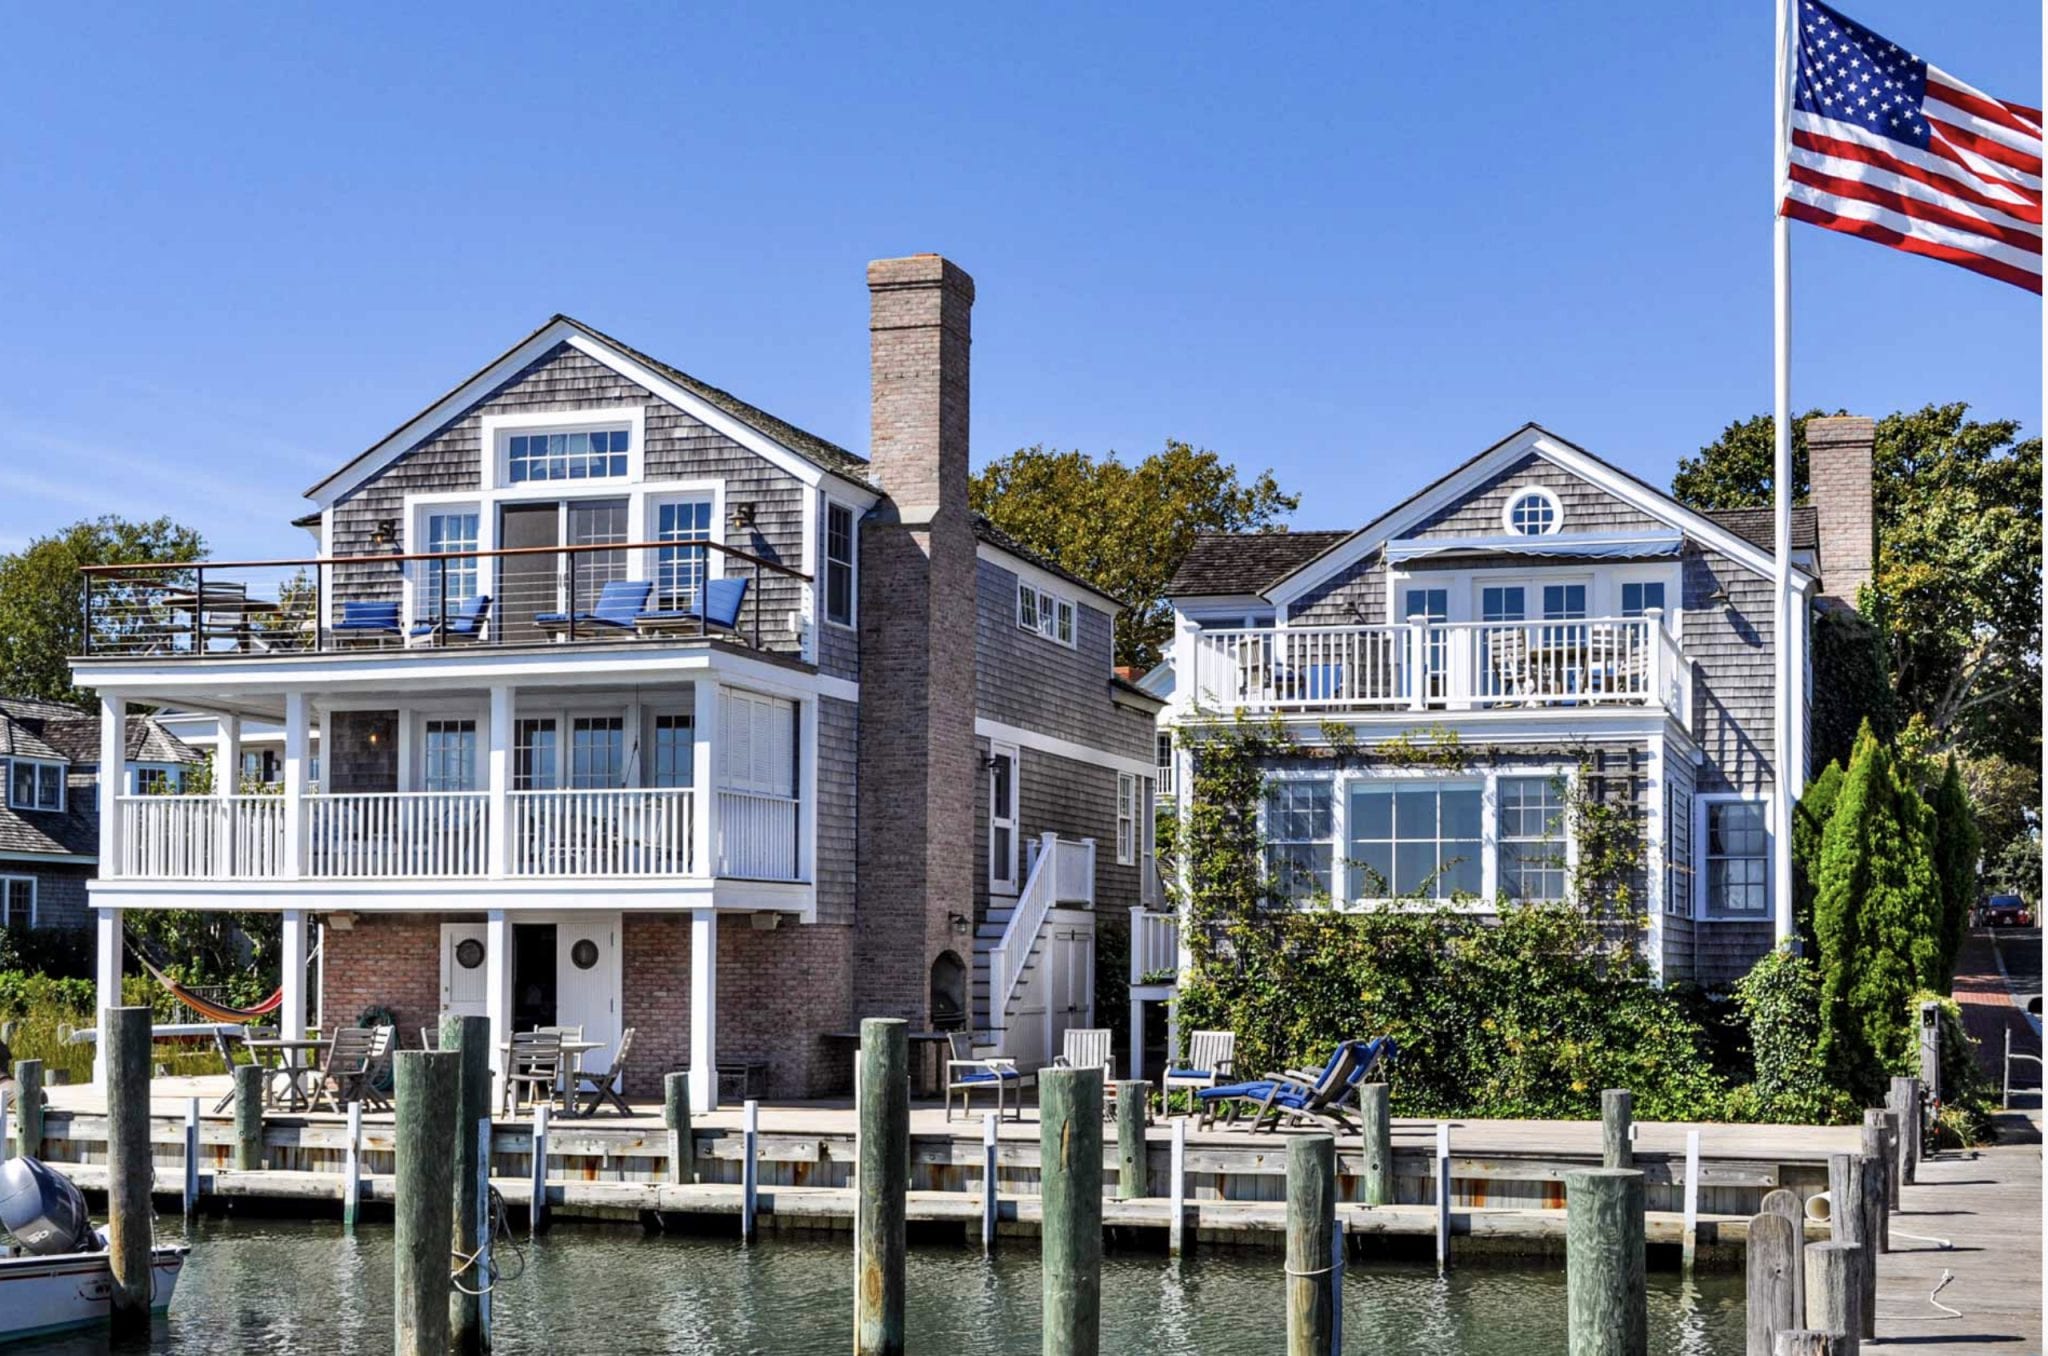 Martha's Vineyard Vacation Rentals Our Most Popular Picks For Summer 2021